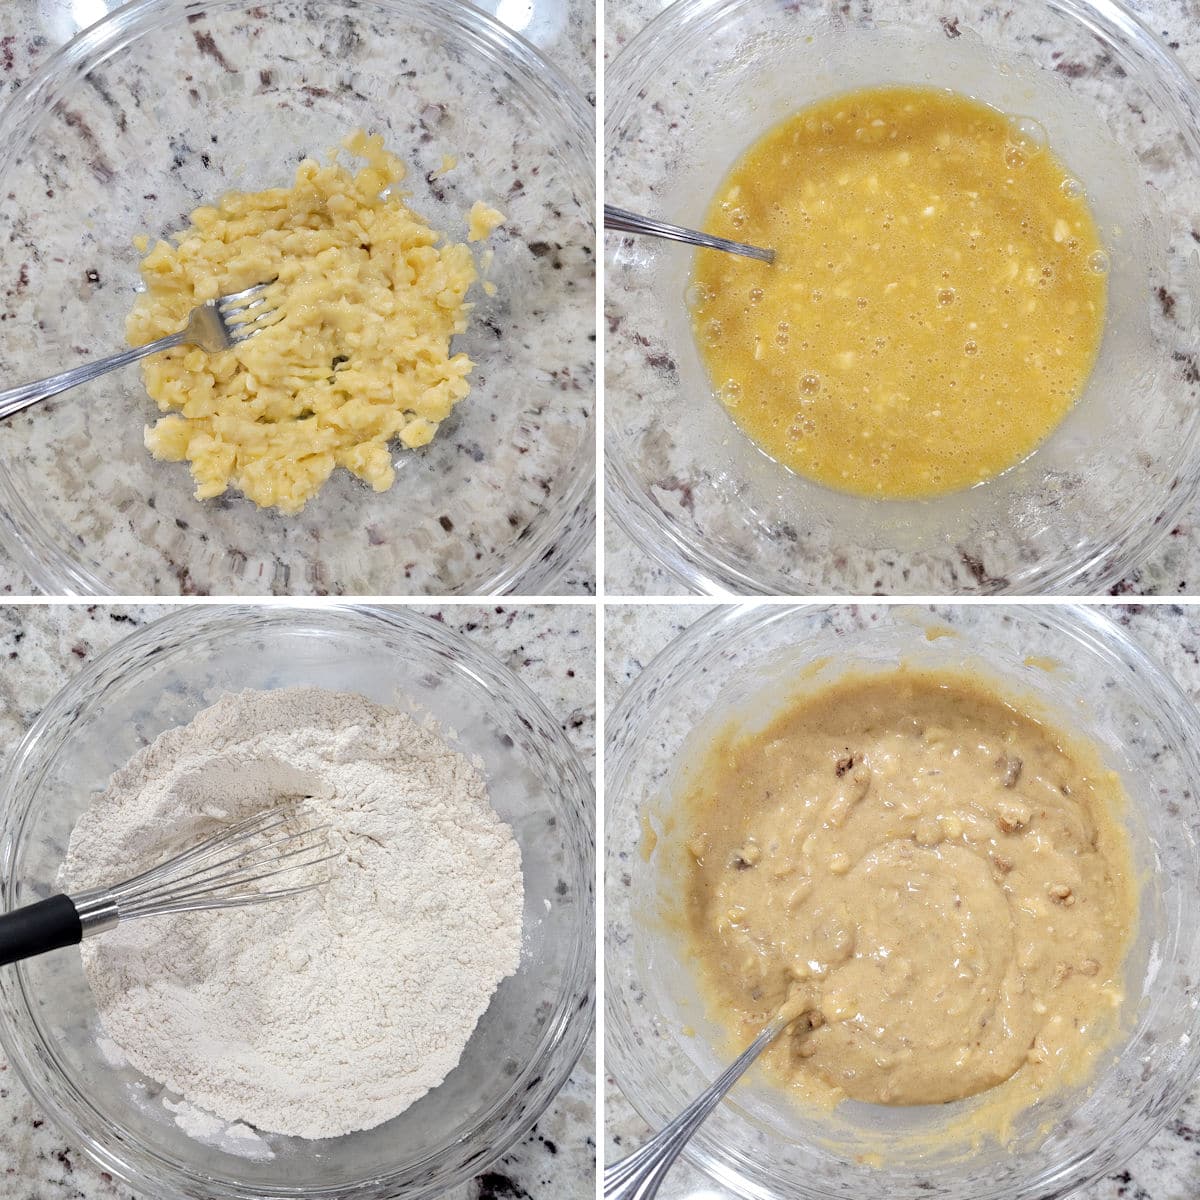 Mixing banana bread batter in a glass bowl.